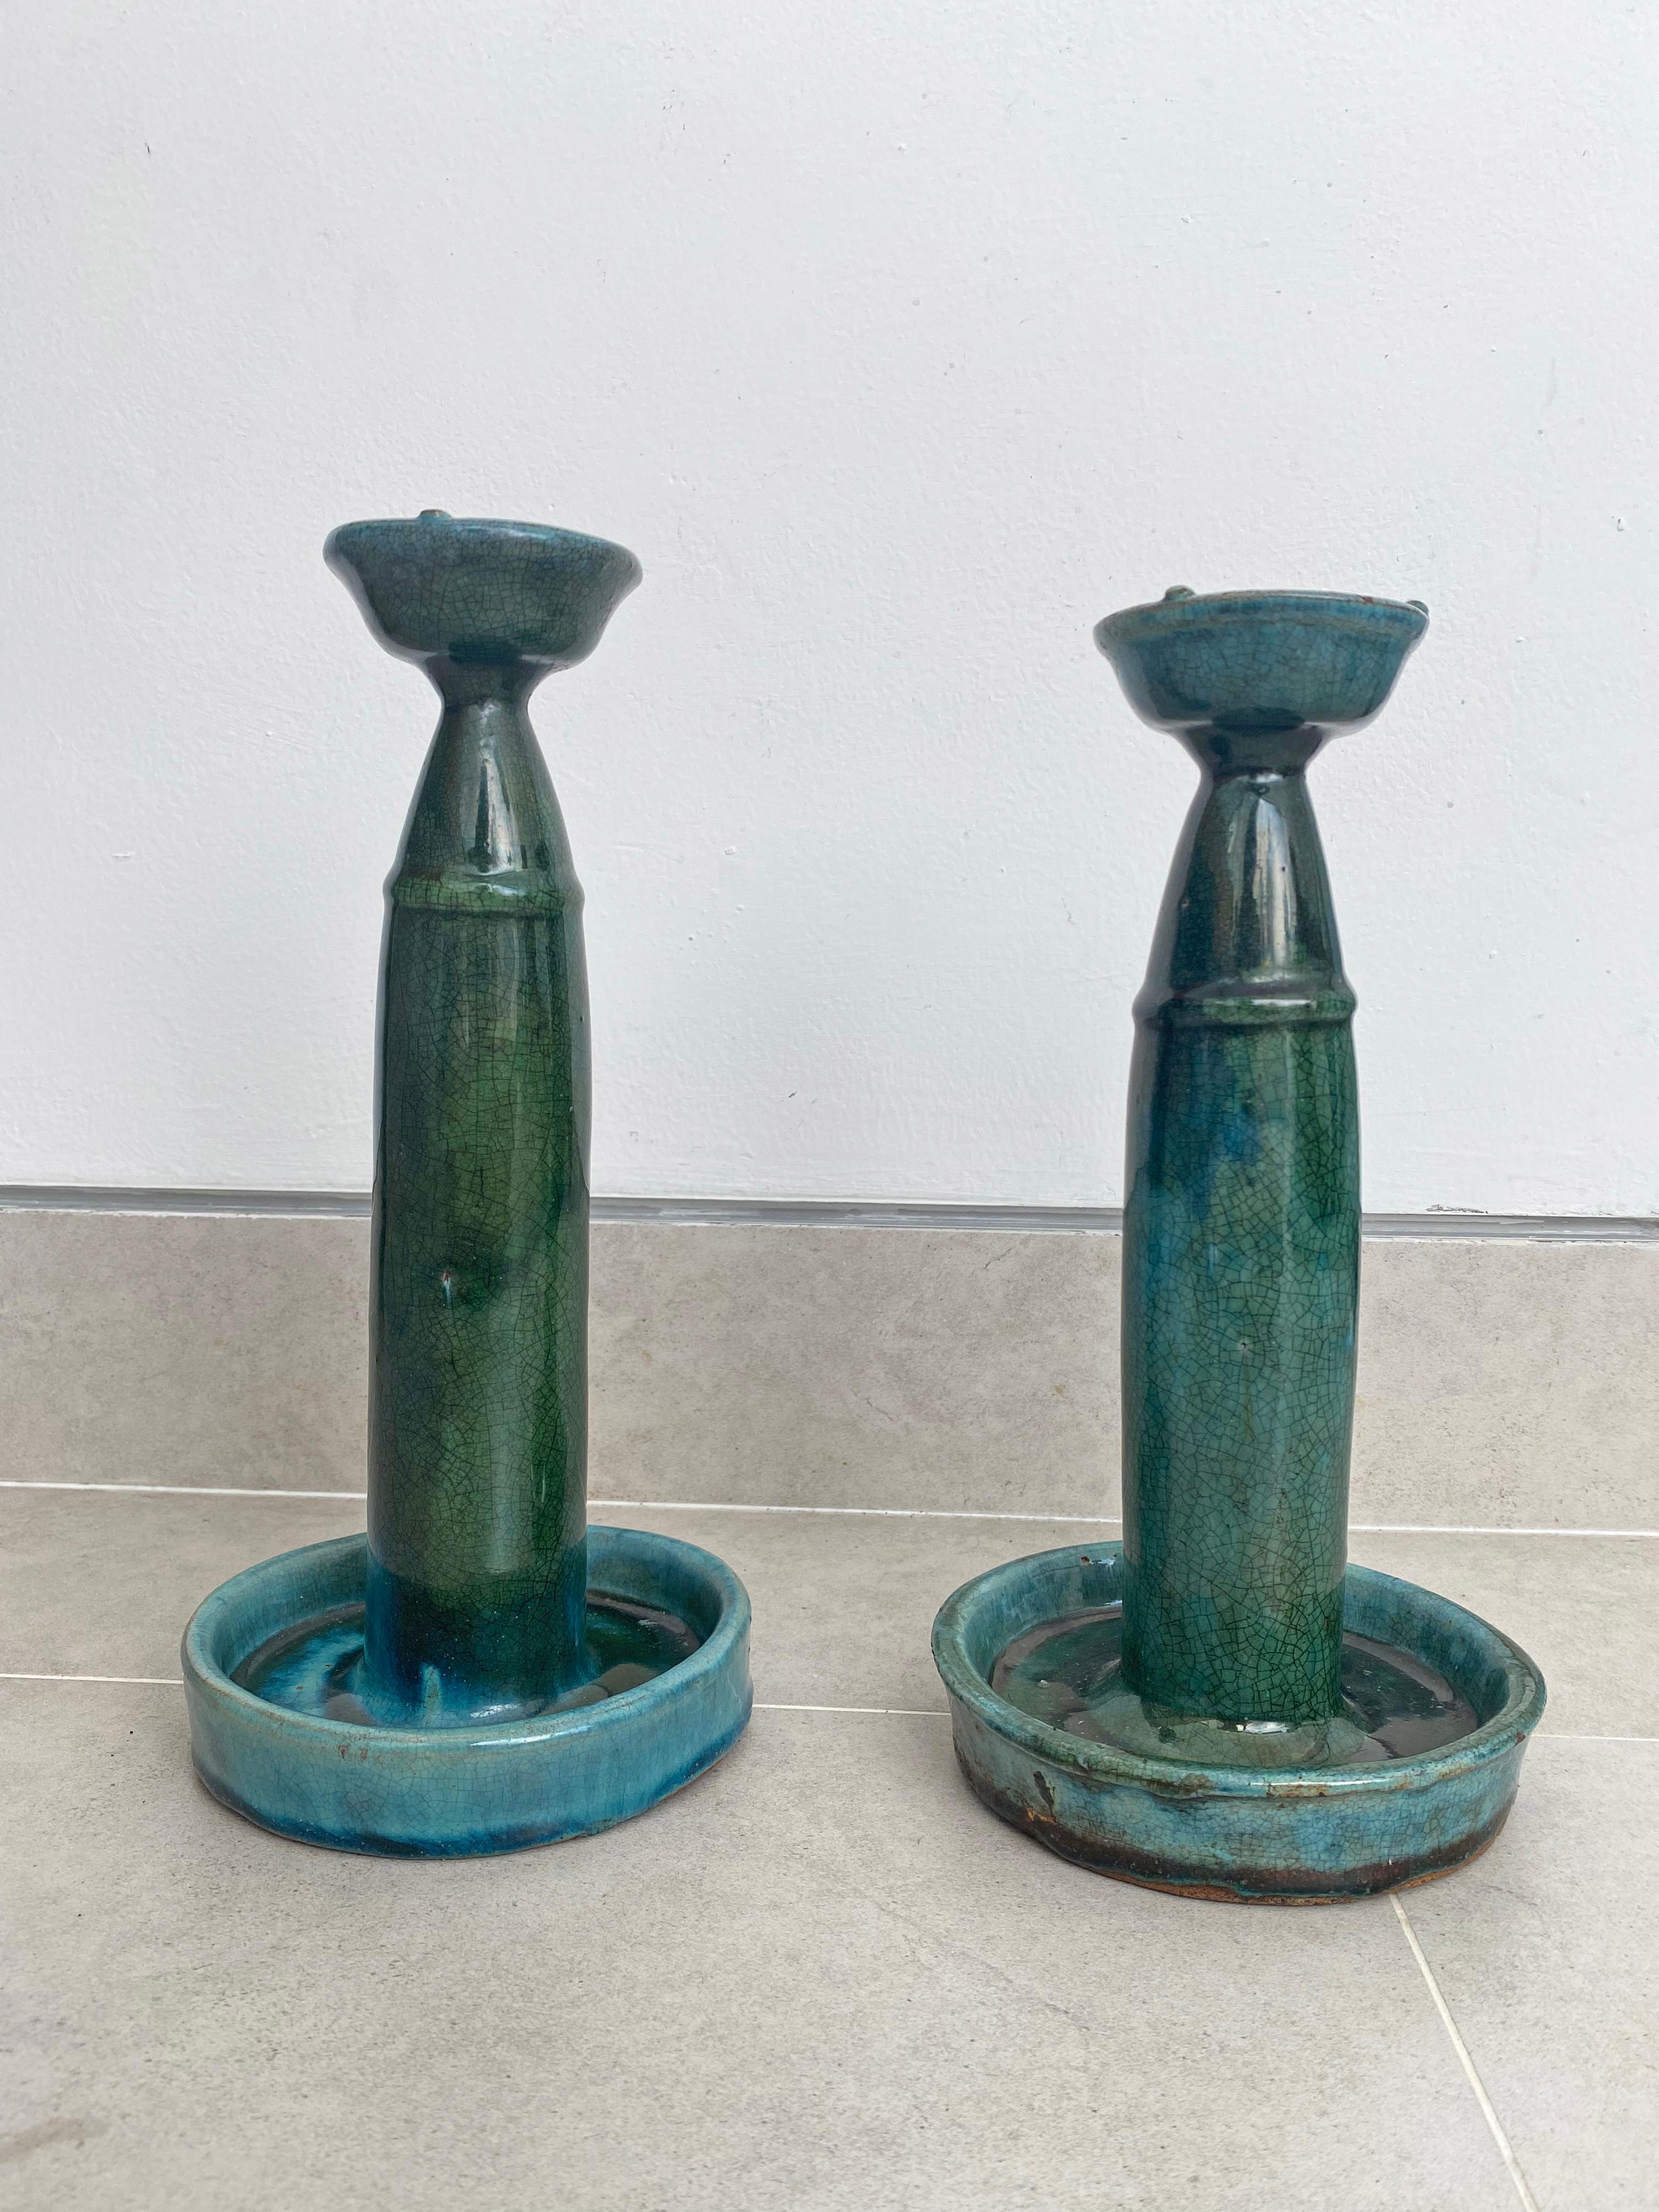 These Shiwan ware oil lamps from the early 20th century feature a green/blue glaze. Shiwan ware is a style of Chinese pottery from the Shiwanzhen district near Guangdong, China. Elegant decorative objects or candleholders. 

Measures: Diameter